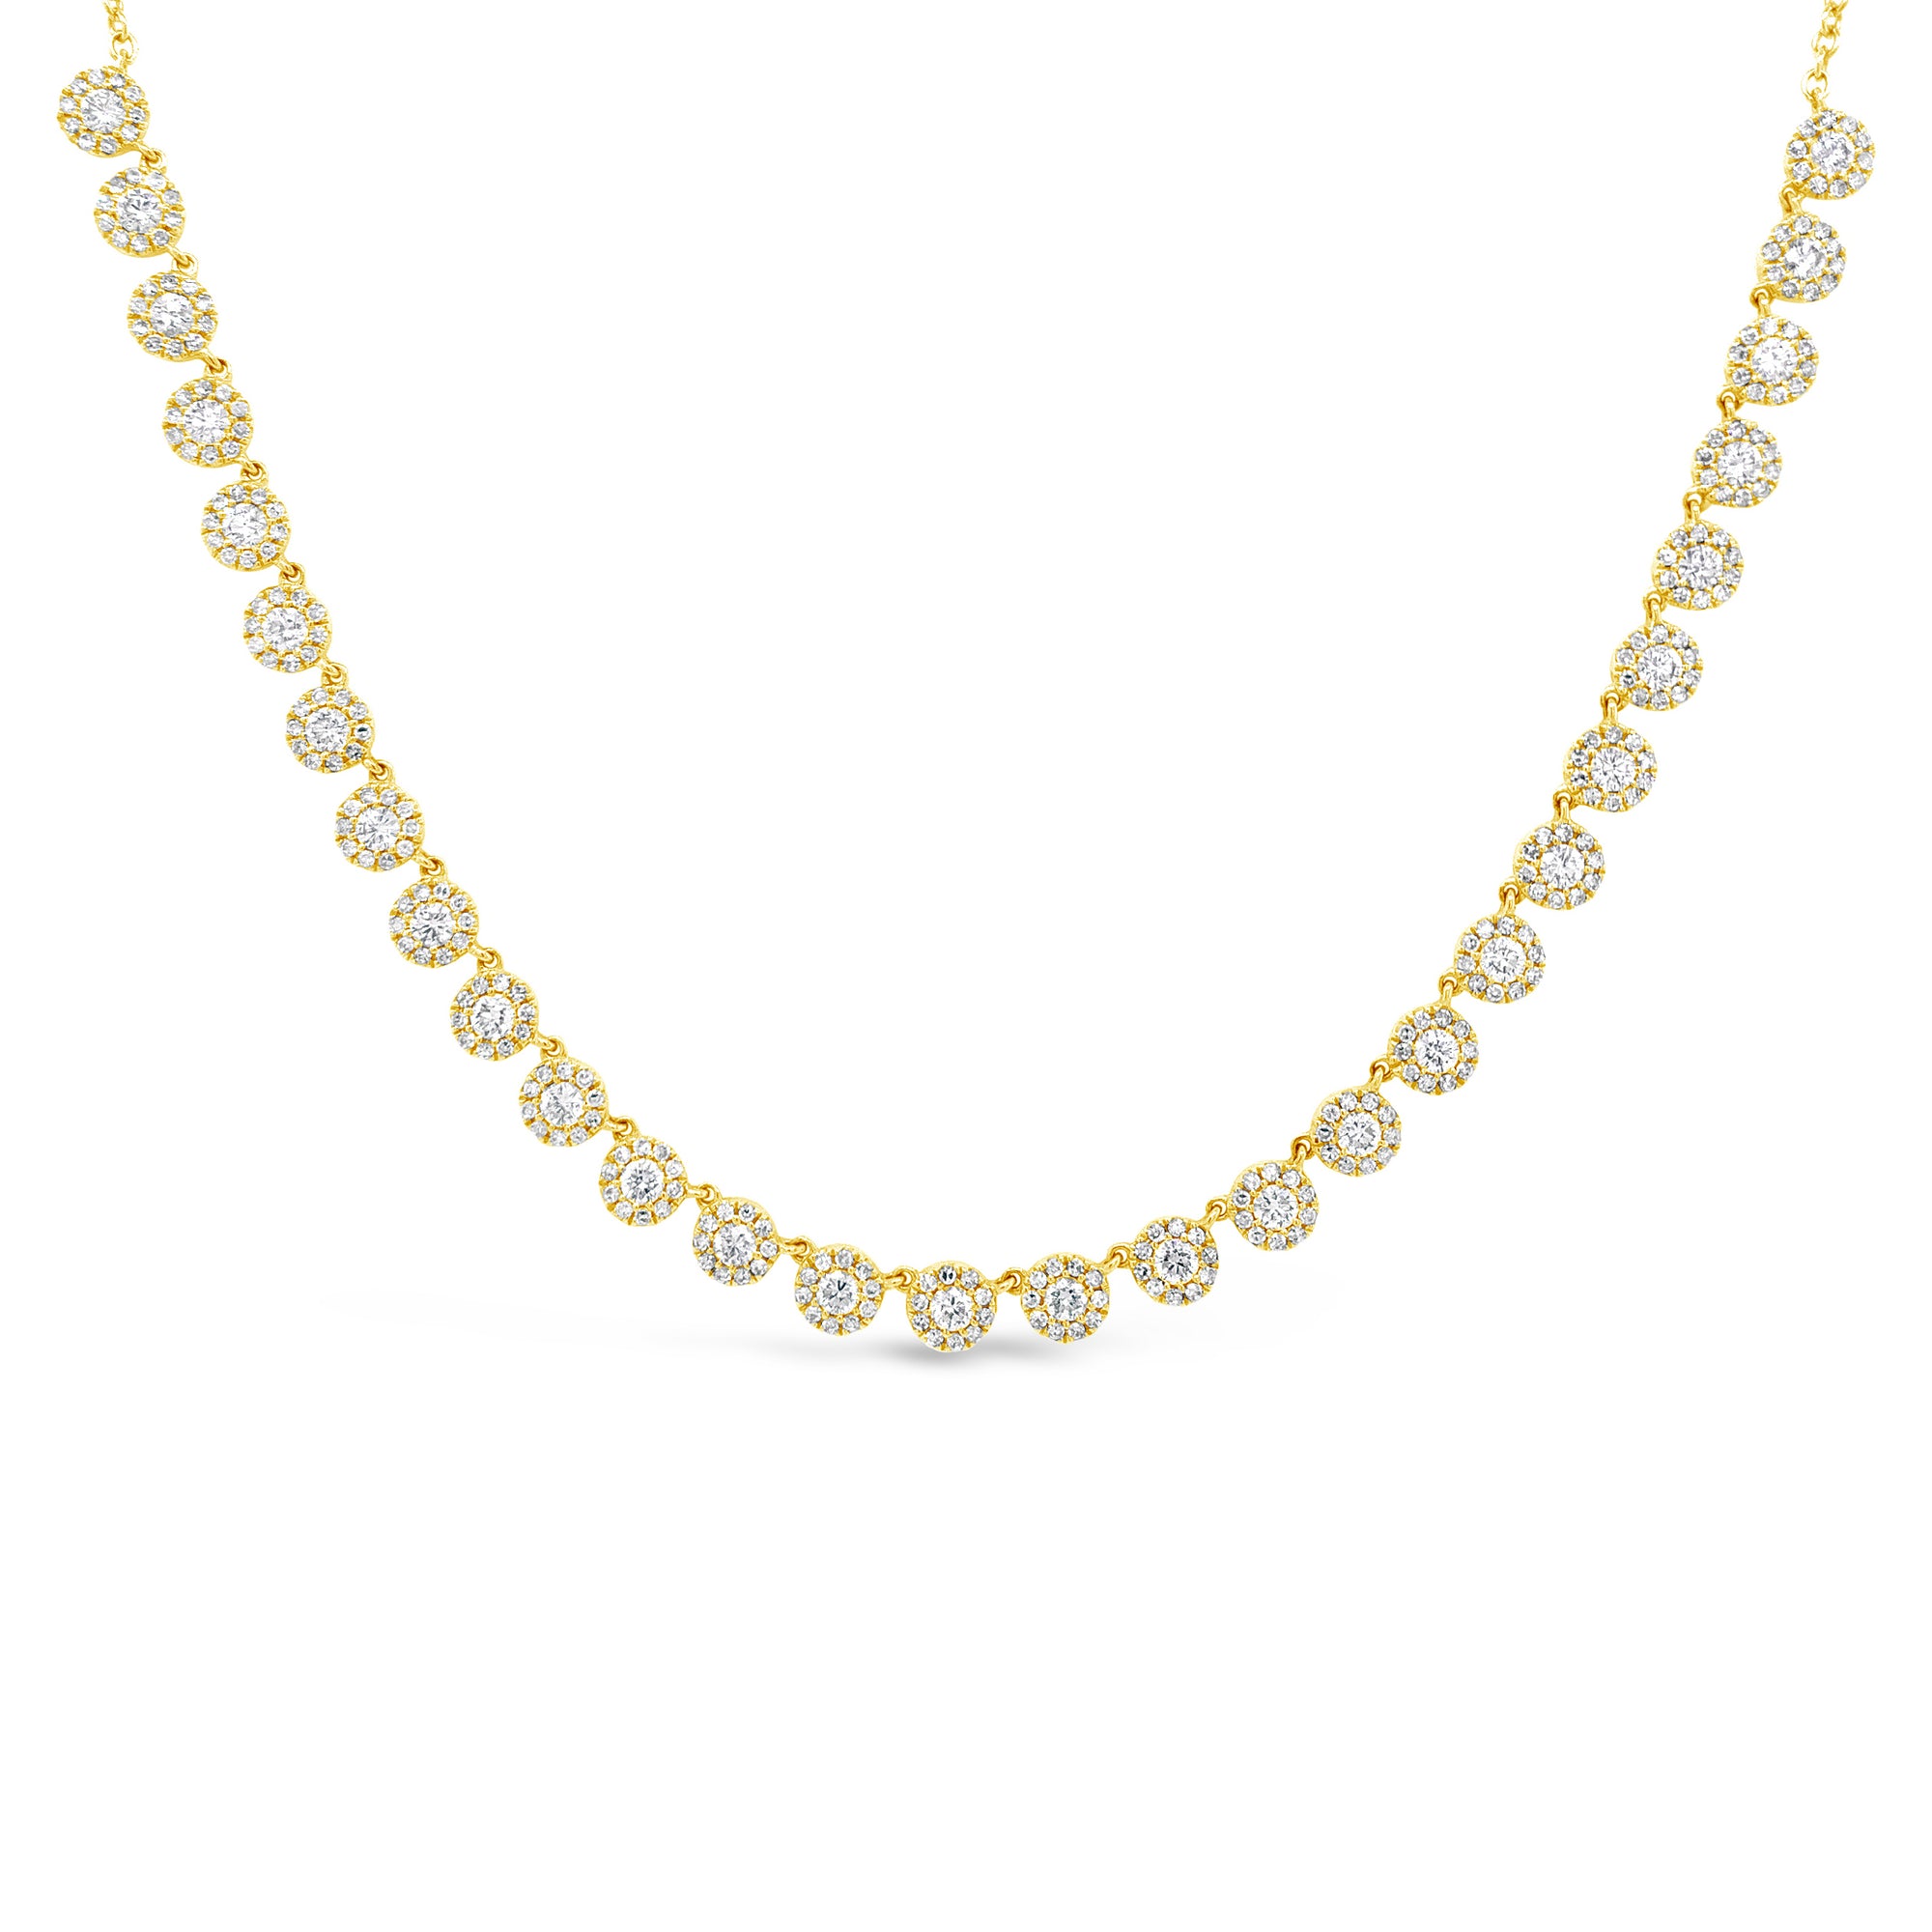 gold necklace with diamonds on white background